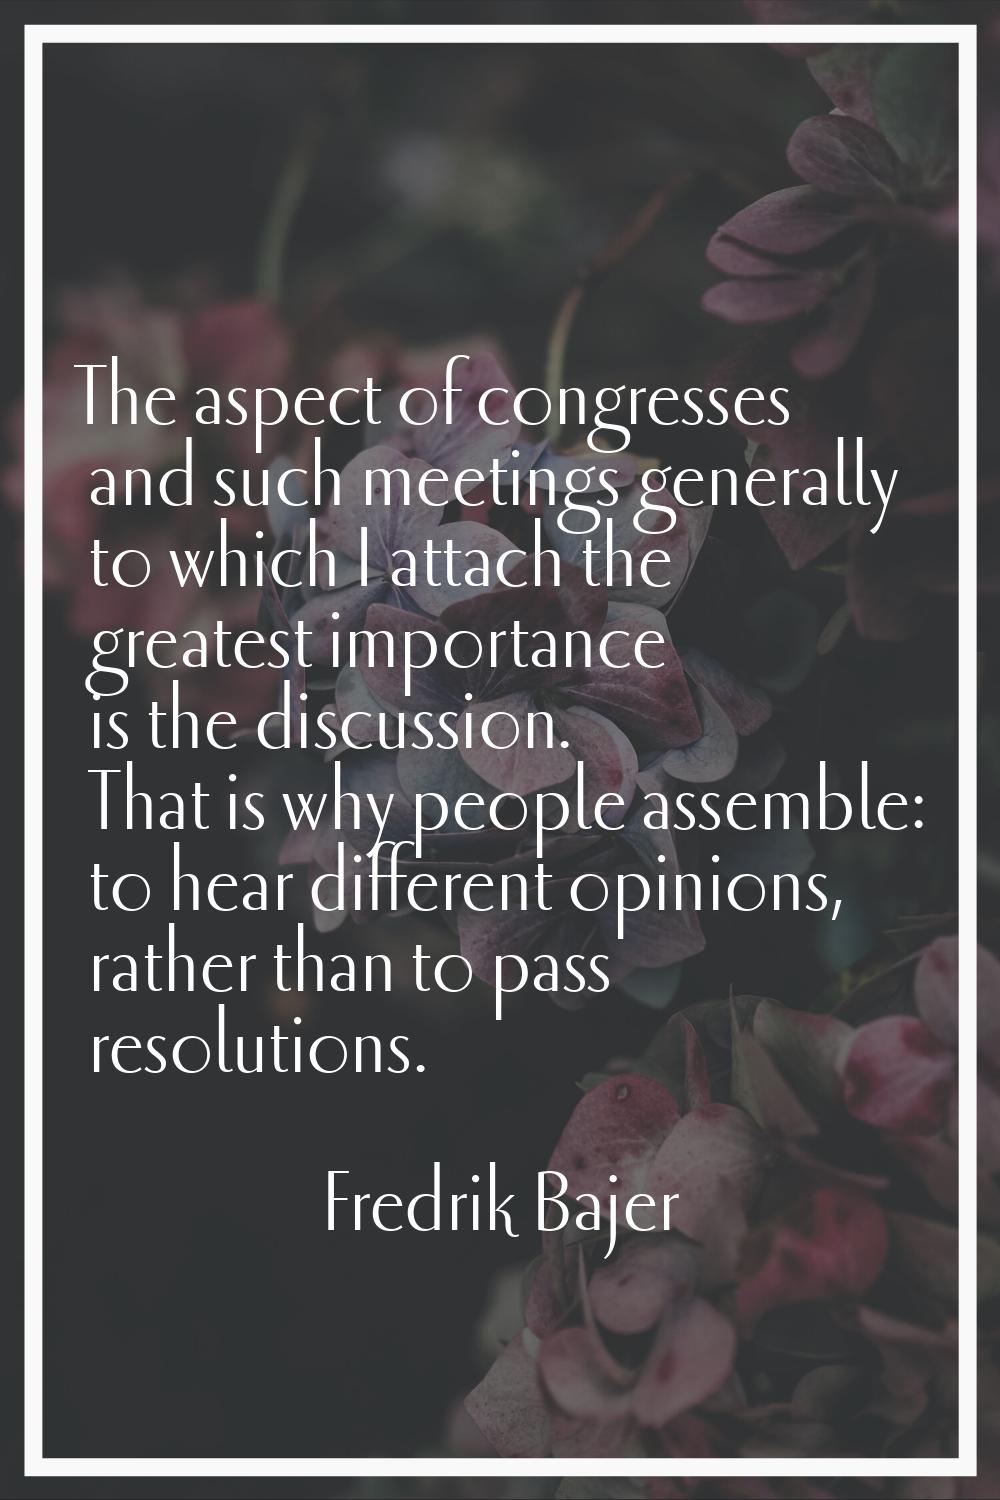 The aspect of congresses and such meetings generally to which I attach the greatest importance is t